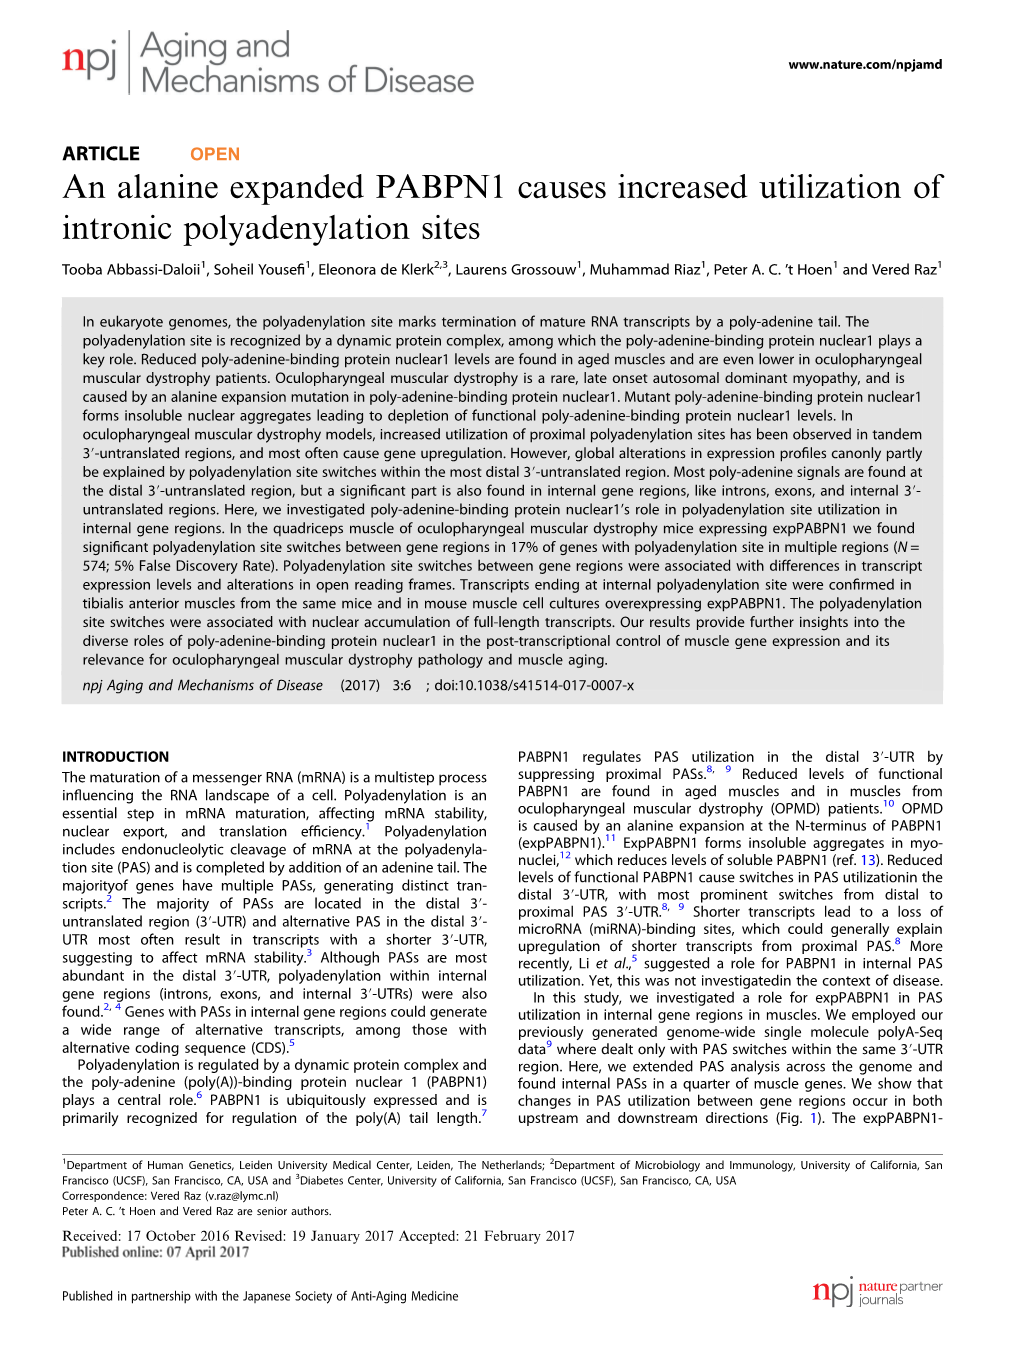 An Alanine Expanded PABPN1 Causes Increased Utilization of Intronic Polyadenylation Sites